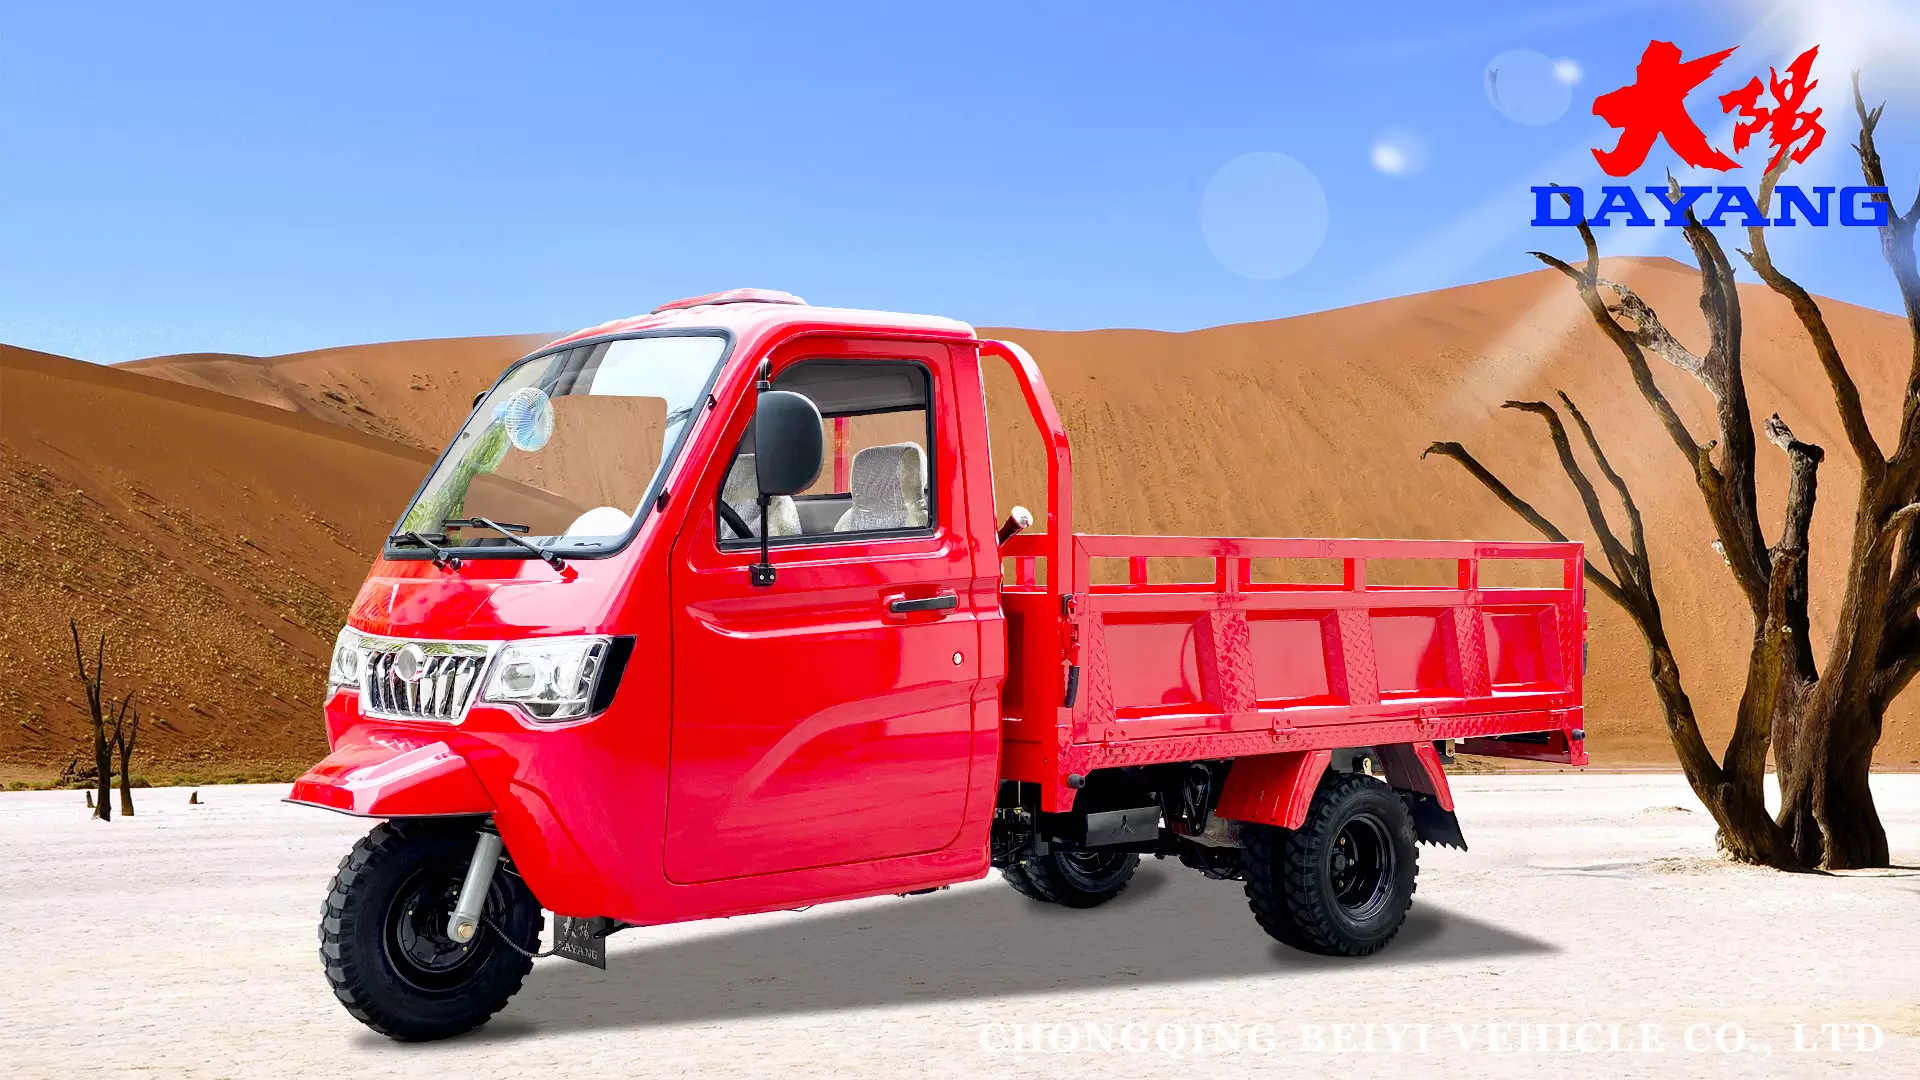 DAYANG BEIYI T5 Enclosed cabin heavy loading tricycle with powerful engine and big cargo truck tricycle three wheels